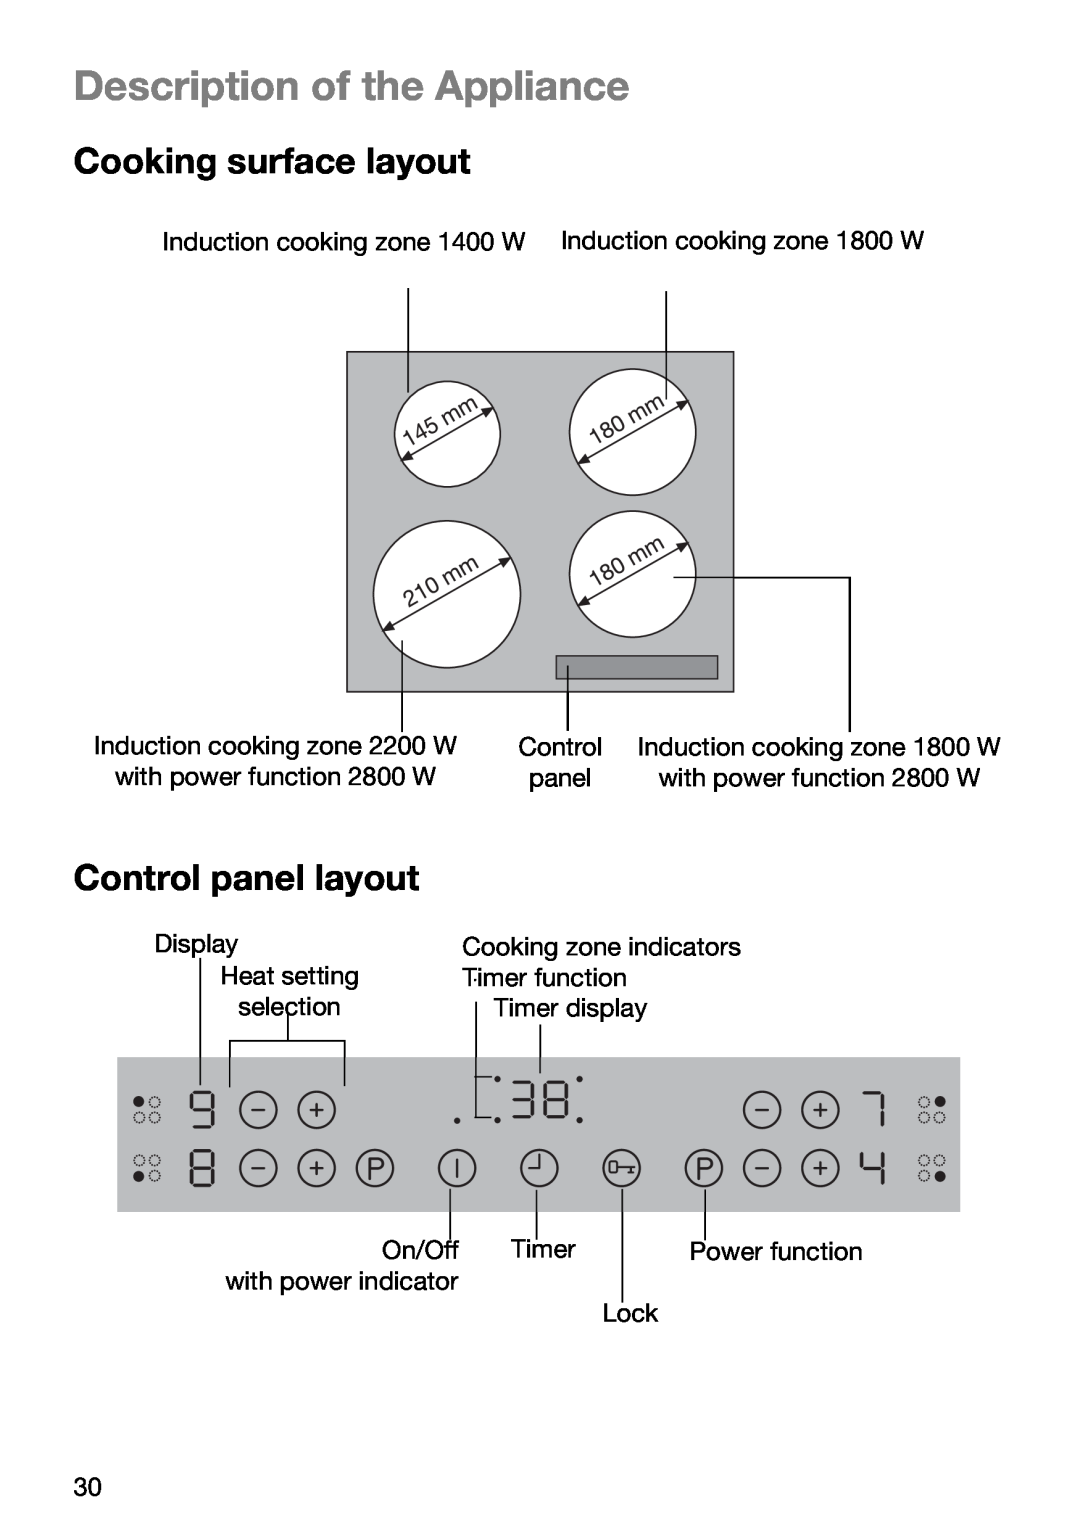 Zanussi ZKT 652 DX operating instructions Description of the Appliance, Cooking surface layout, Control panel layout 